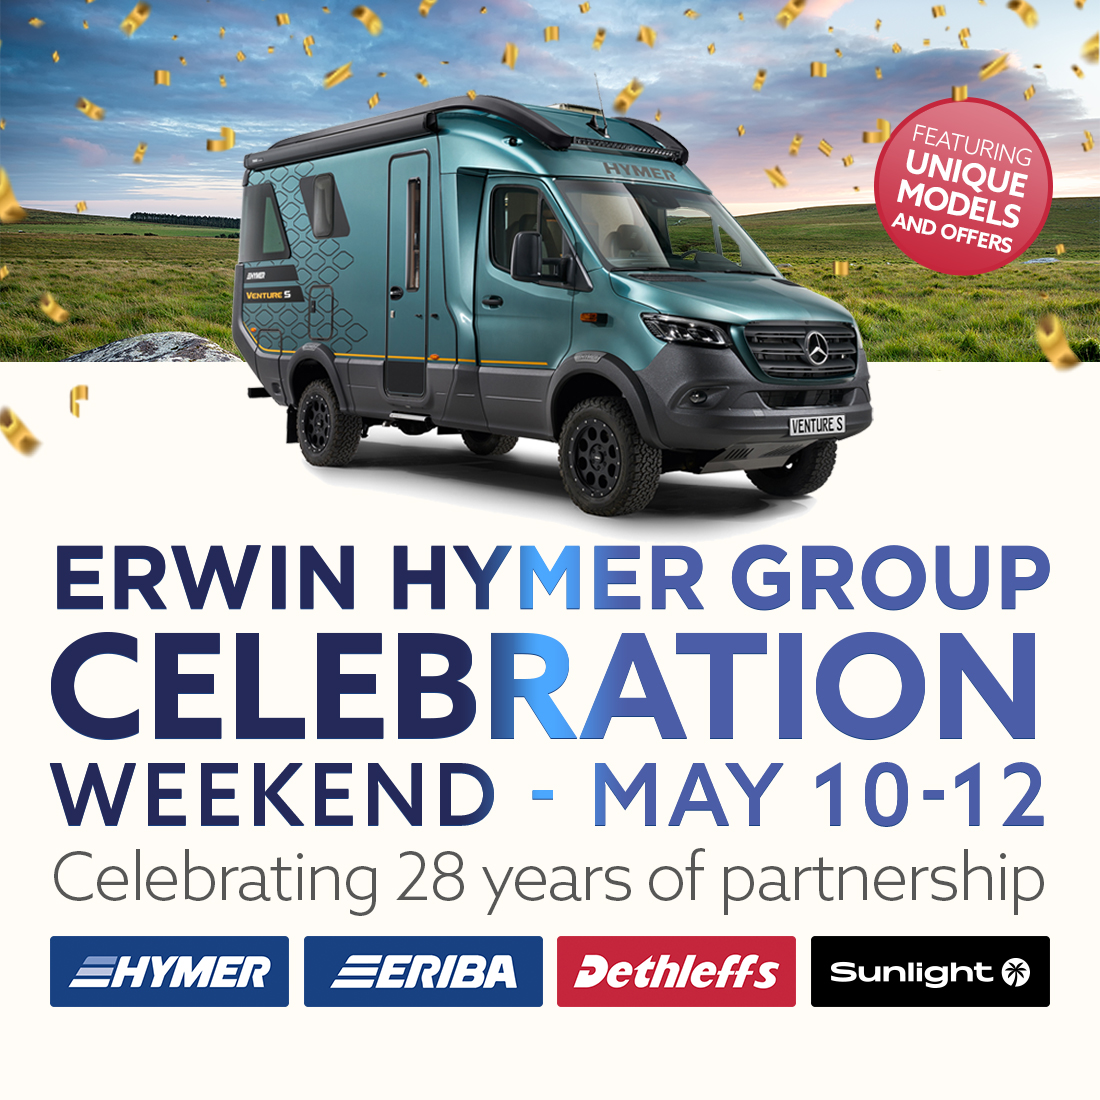 🎉 Join us at our Erwin Hymer Group Celebration Weekend 10-12 May! 🎉

We're showcasing leisure vehicles by Hymer, Eriba, Dethleffs, and Sunlight from 10-12 May, to celebrate 28 years of partnership with the Erwin Hymer Group. ✨🤝✨

Find out more at > lowdhams.com/hymer-group-sh…